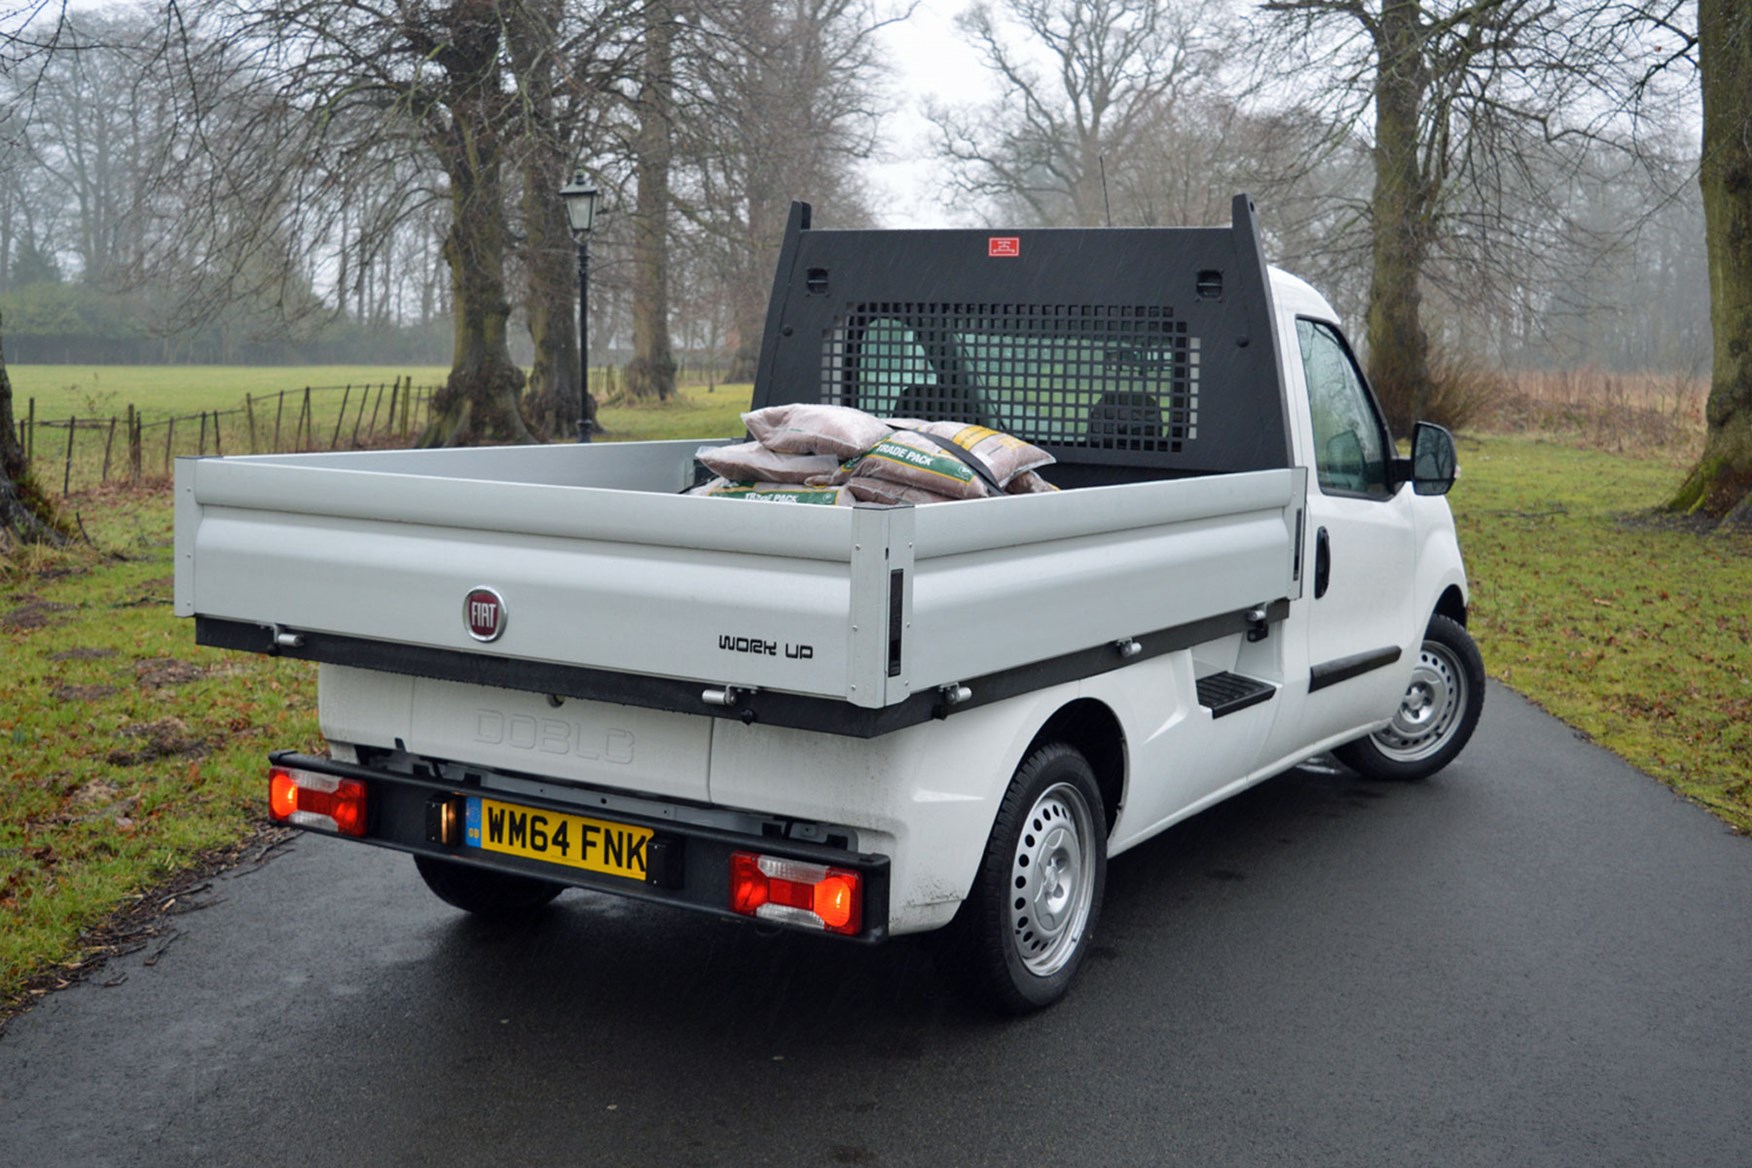 Fiat Doblo review - Work Up dropside pickup, rear view, white, 2015